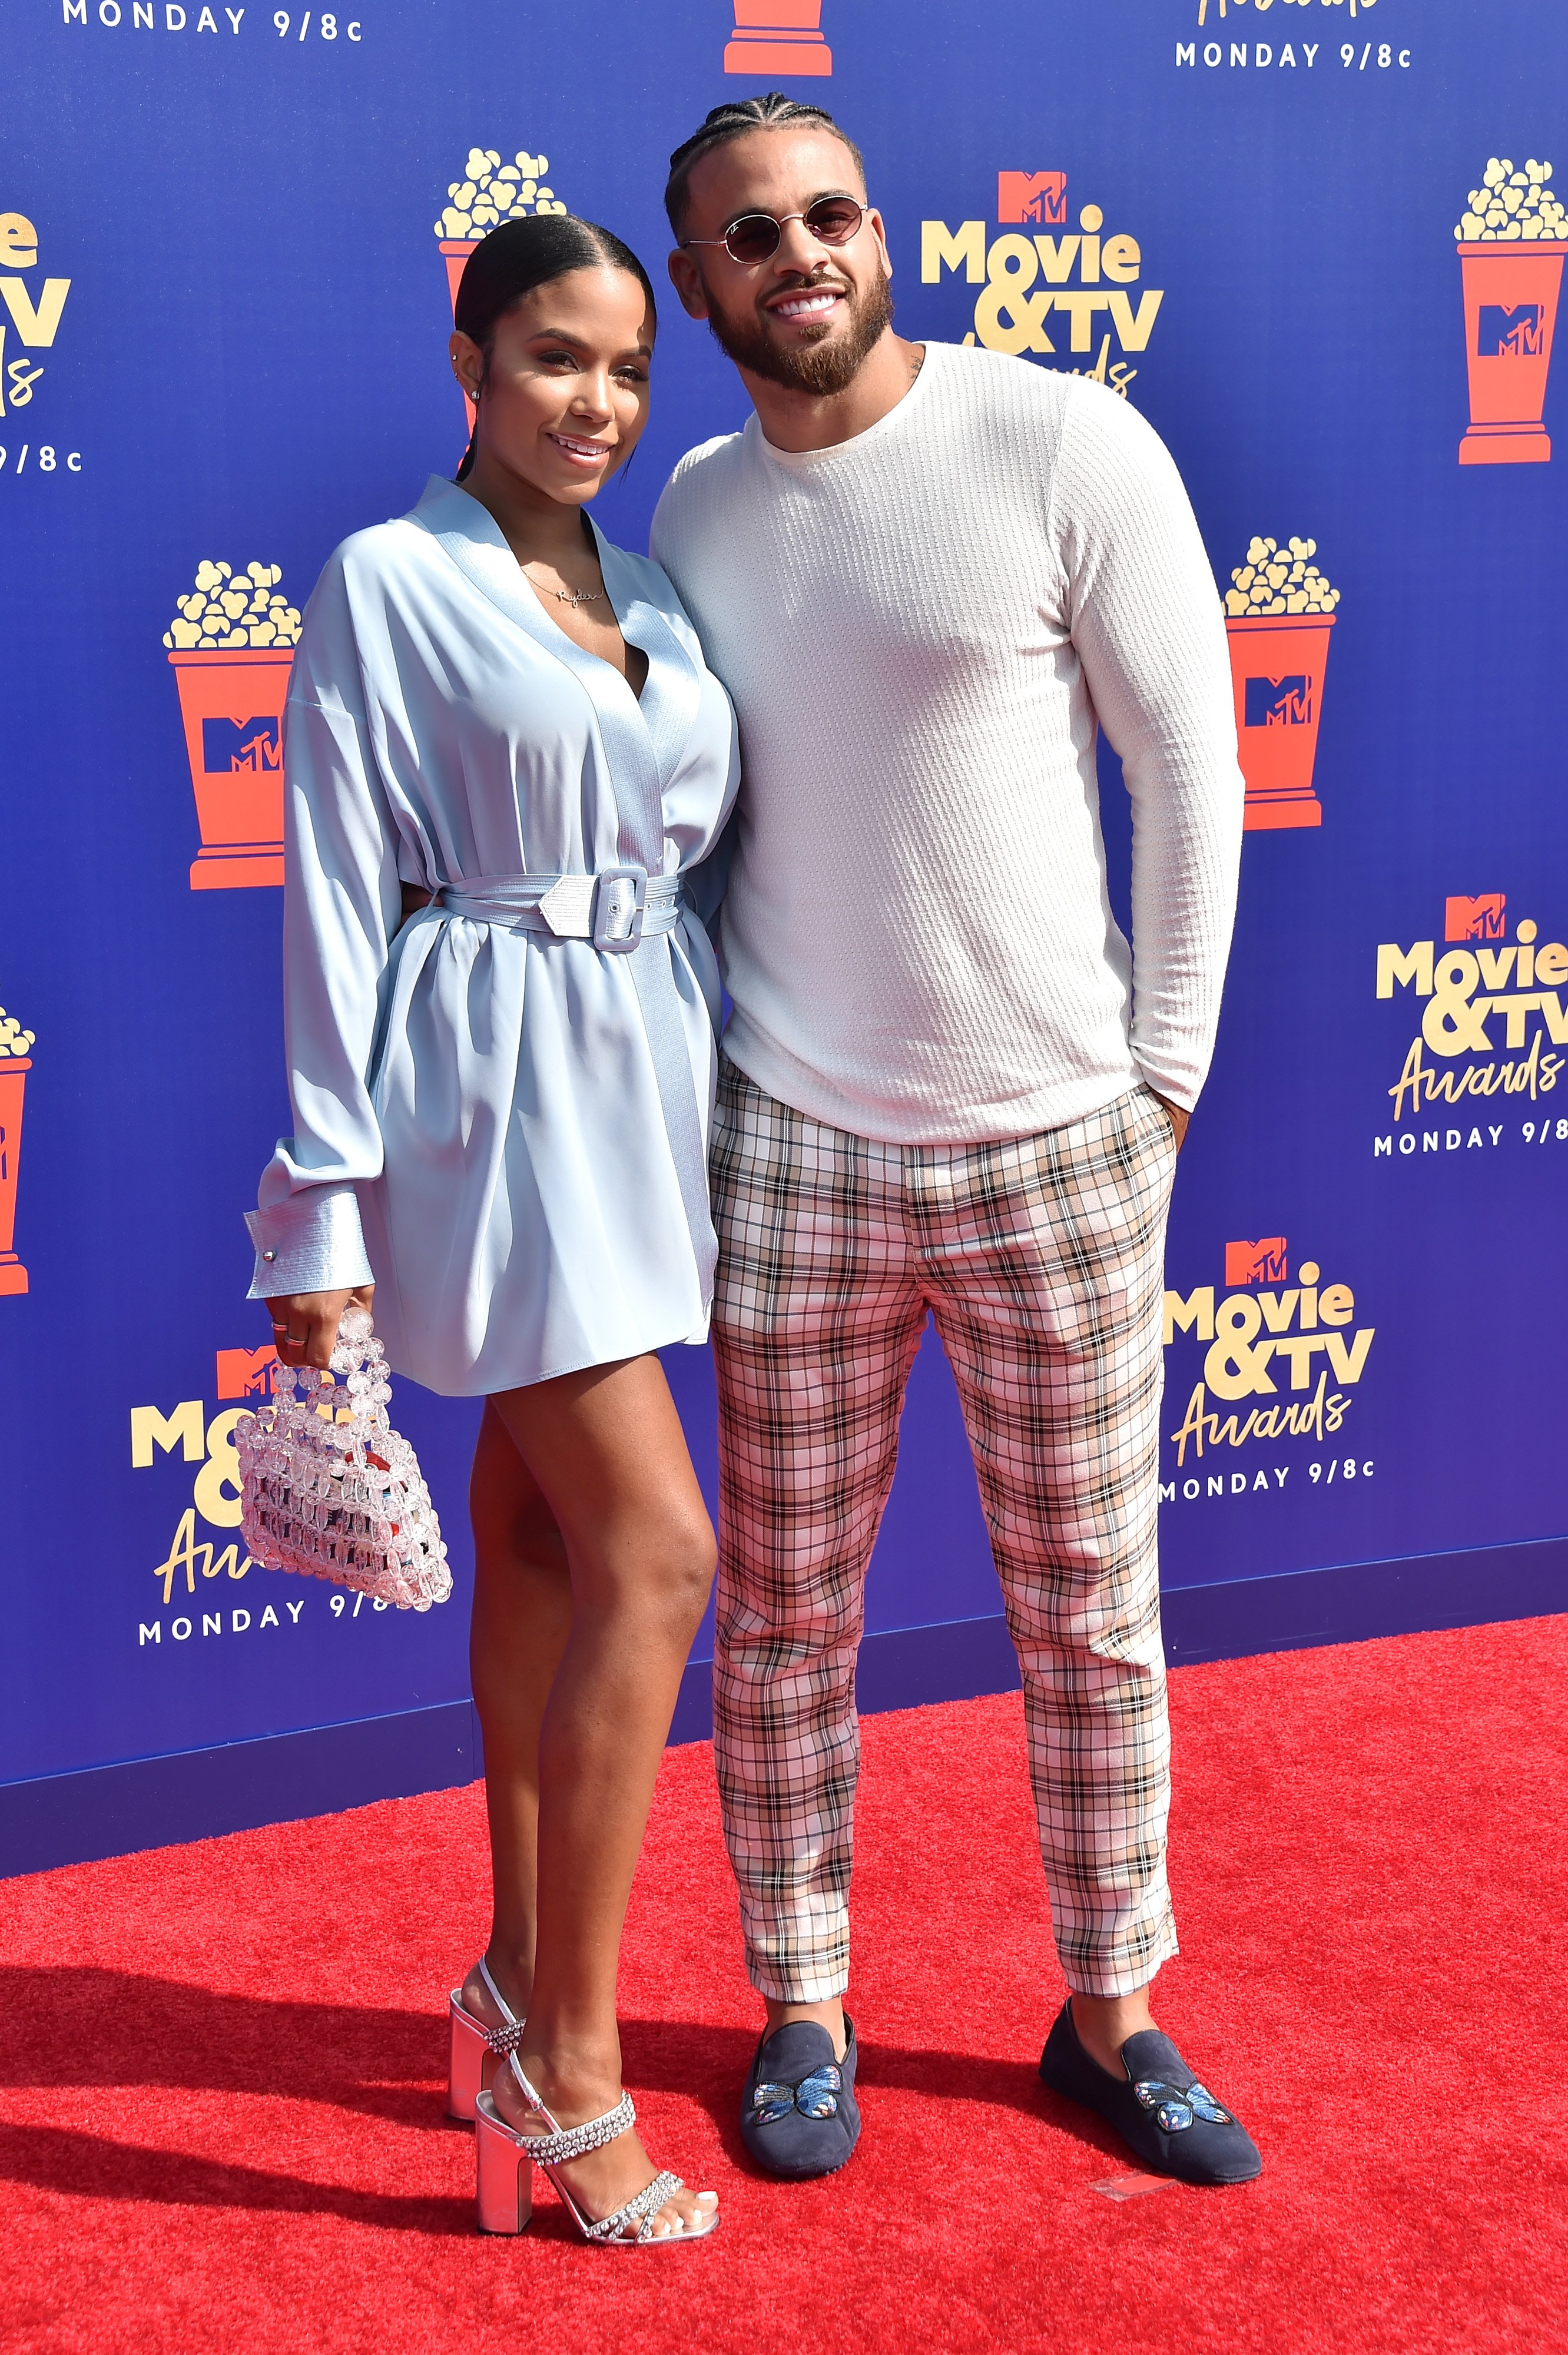 Cheyenne Floyd and Cory Wharton at the 2019 MTV Movie and TV Awards on June 15, 2019 | Photo: Getty Images 